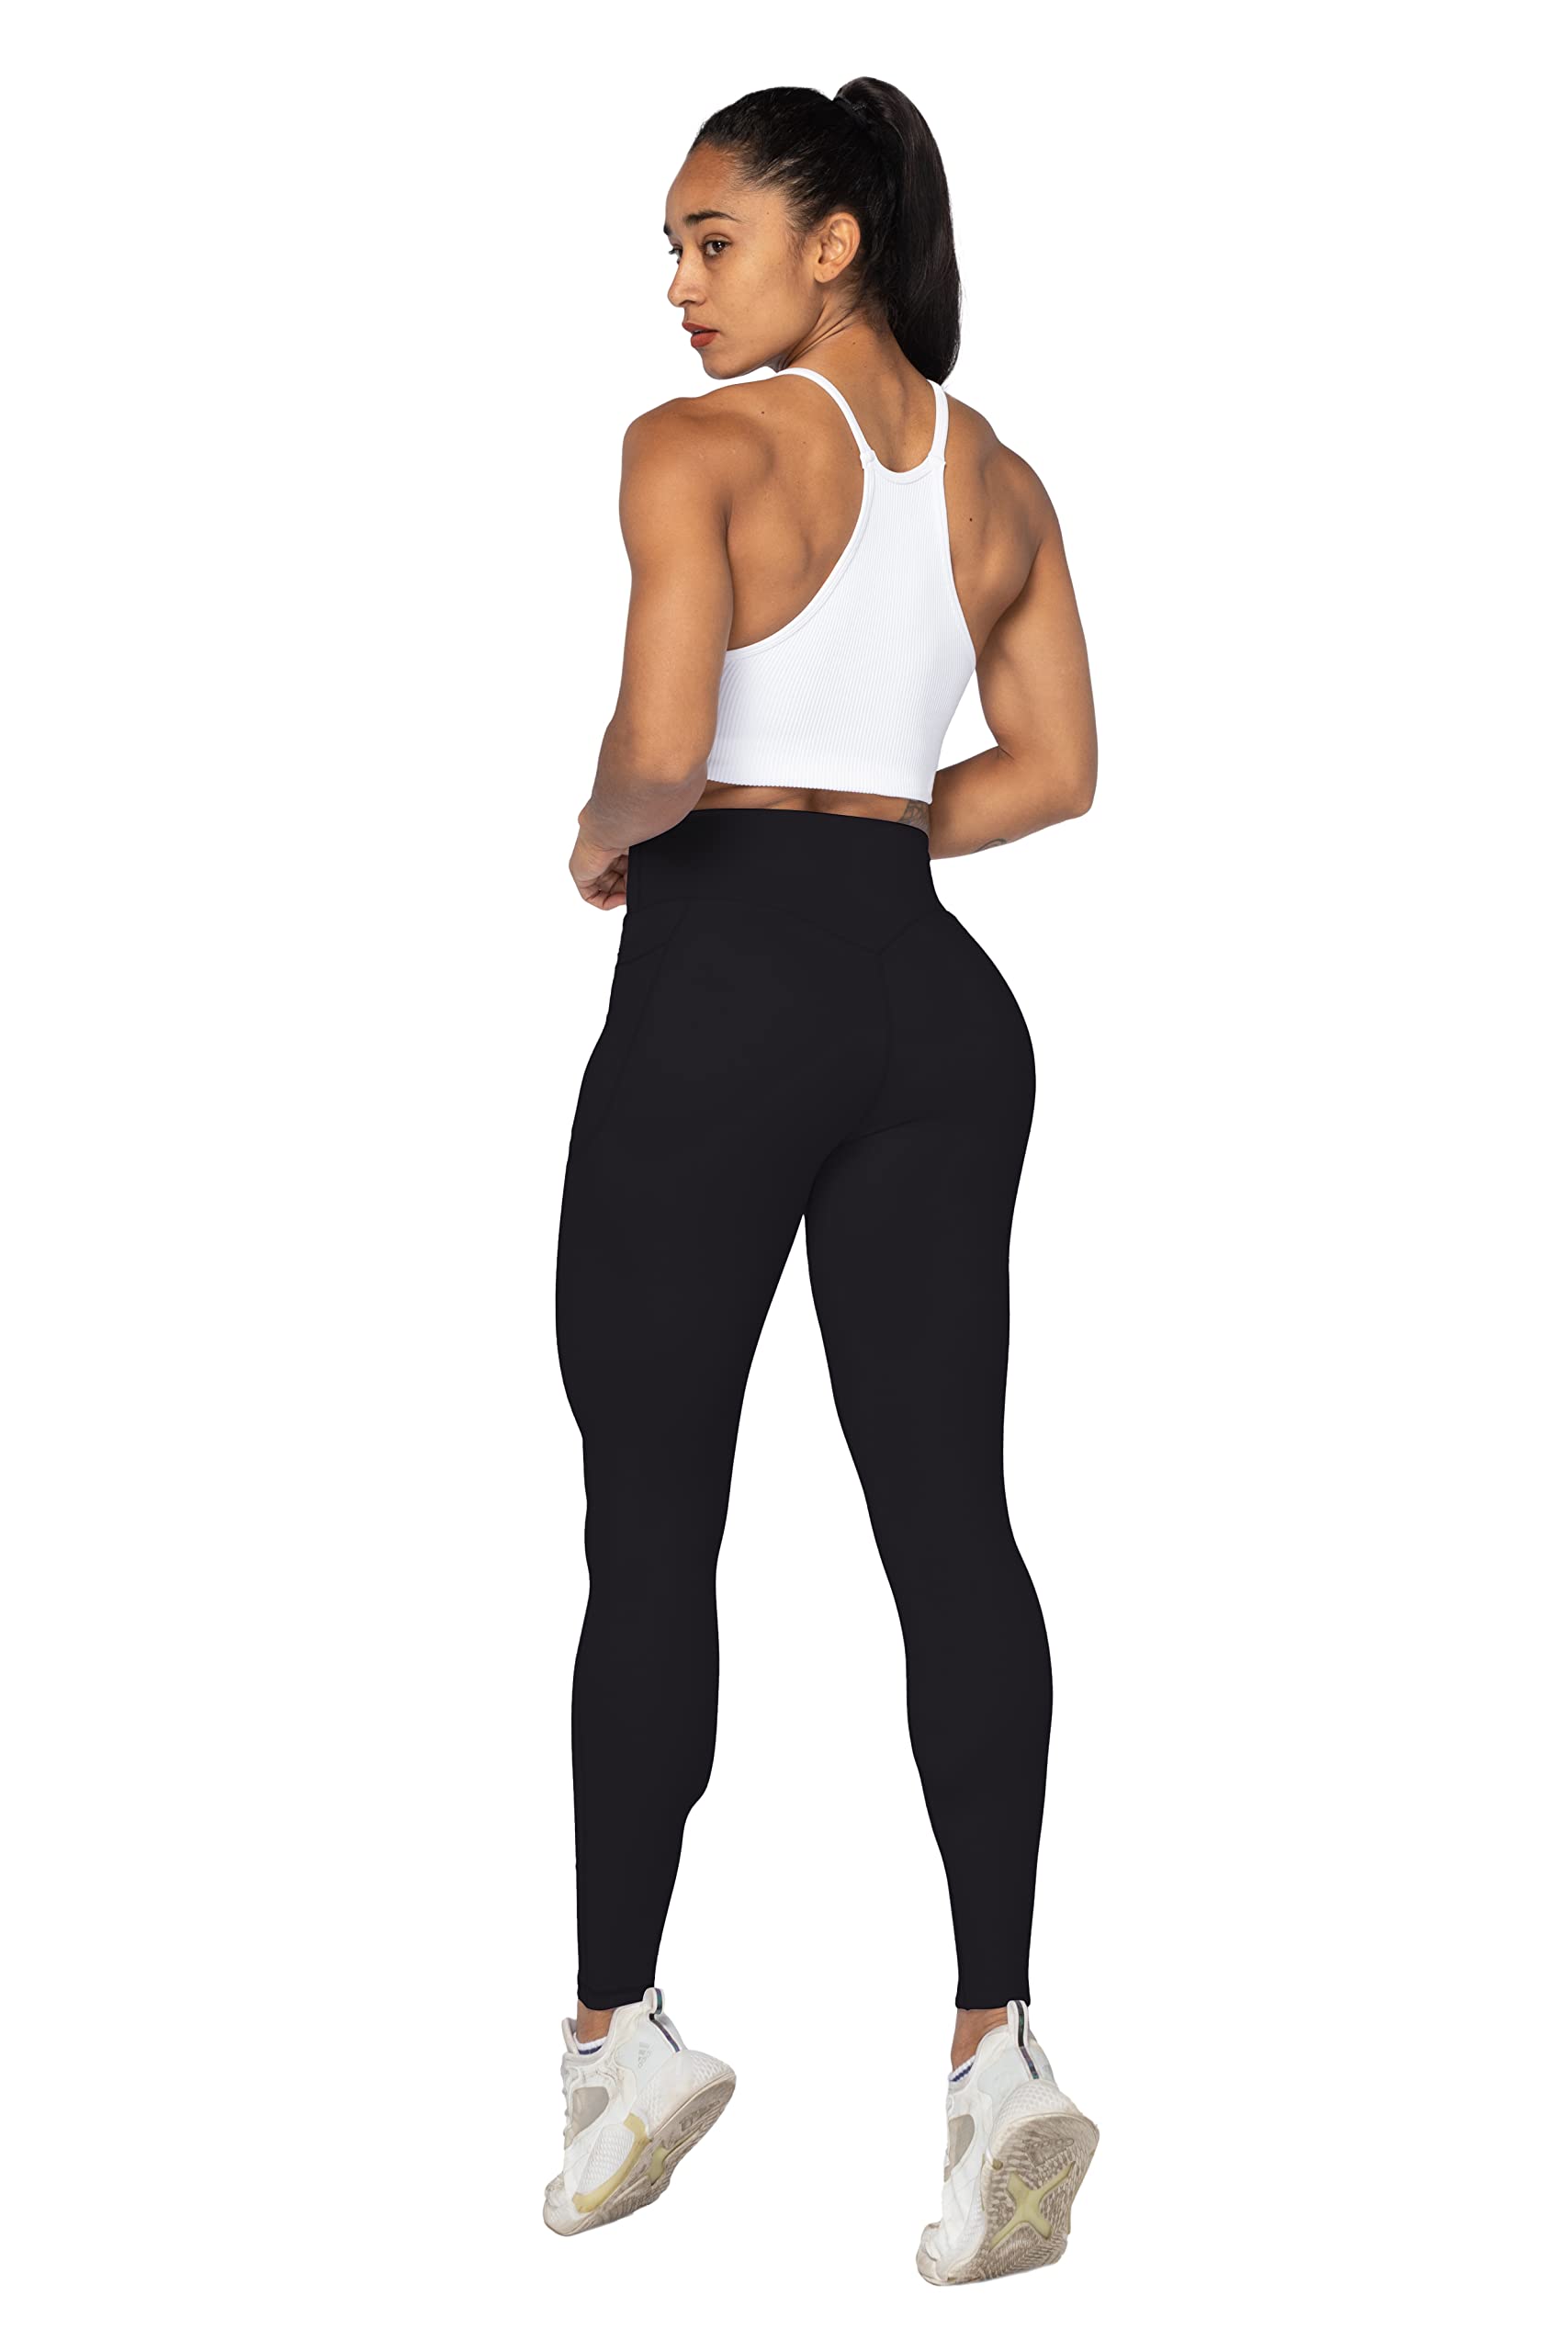 Women Workout Leggings Full Length No Front Seam Buttery Soft Seamless Yoga  Pants Gym Tights With Pockets 4 Way Stretch Fabric